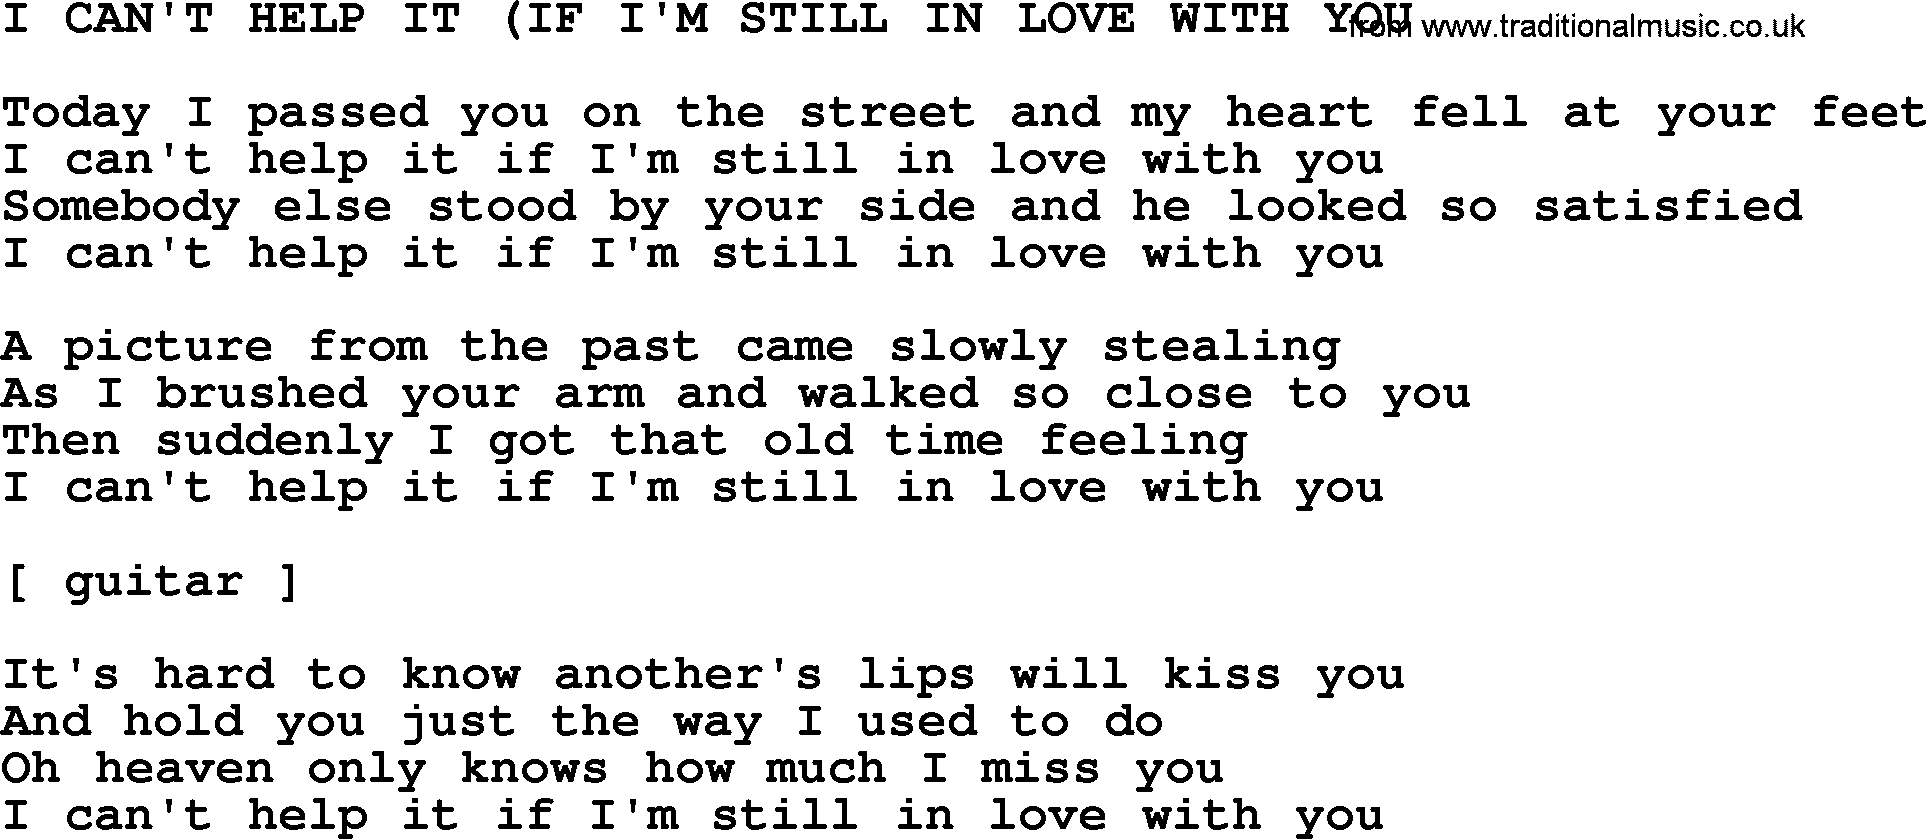 Johnny Cash song I Can't Help It(If I'm Still In Love With You.txt lyrics